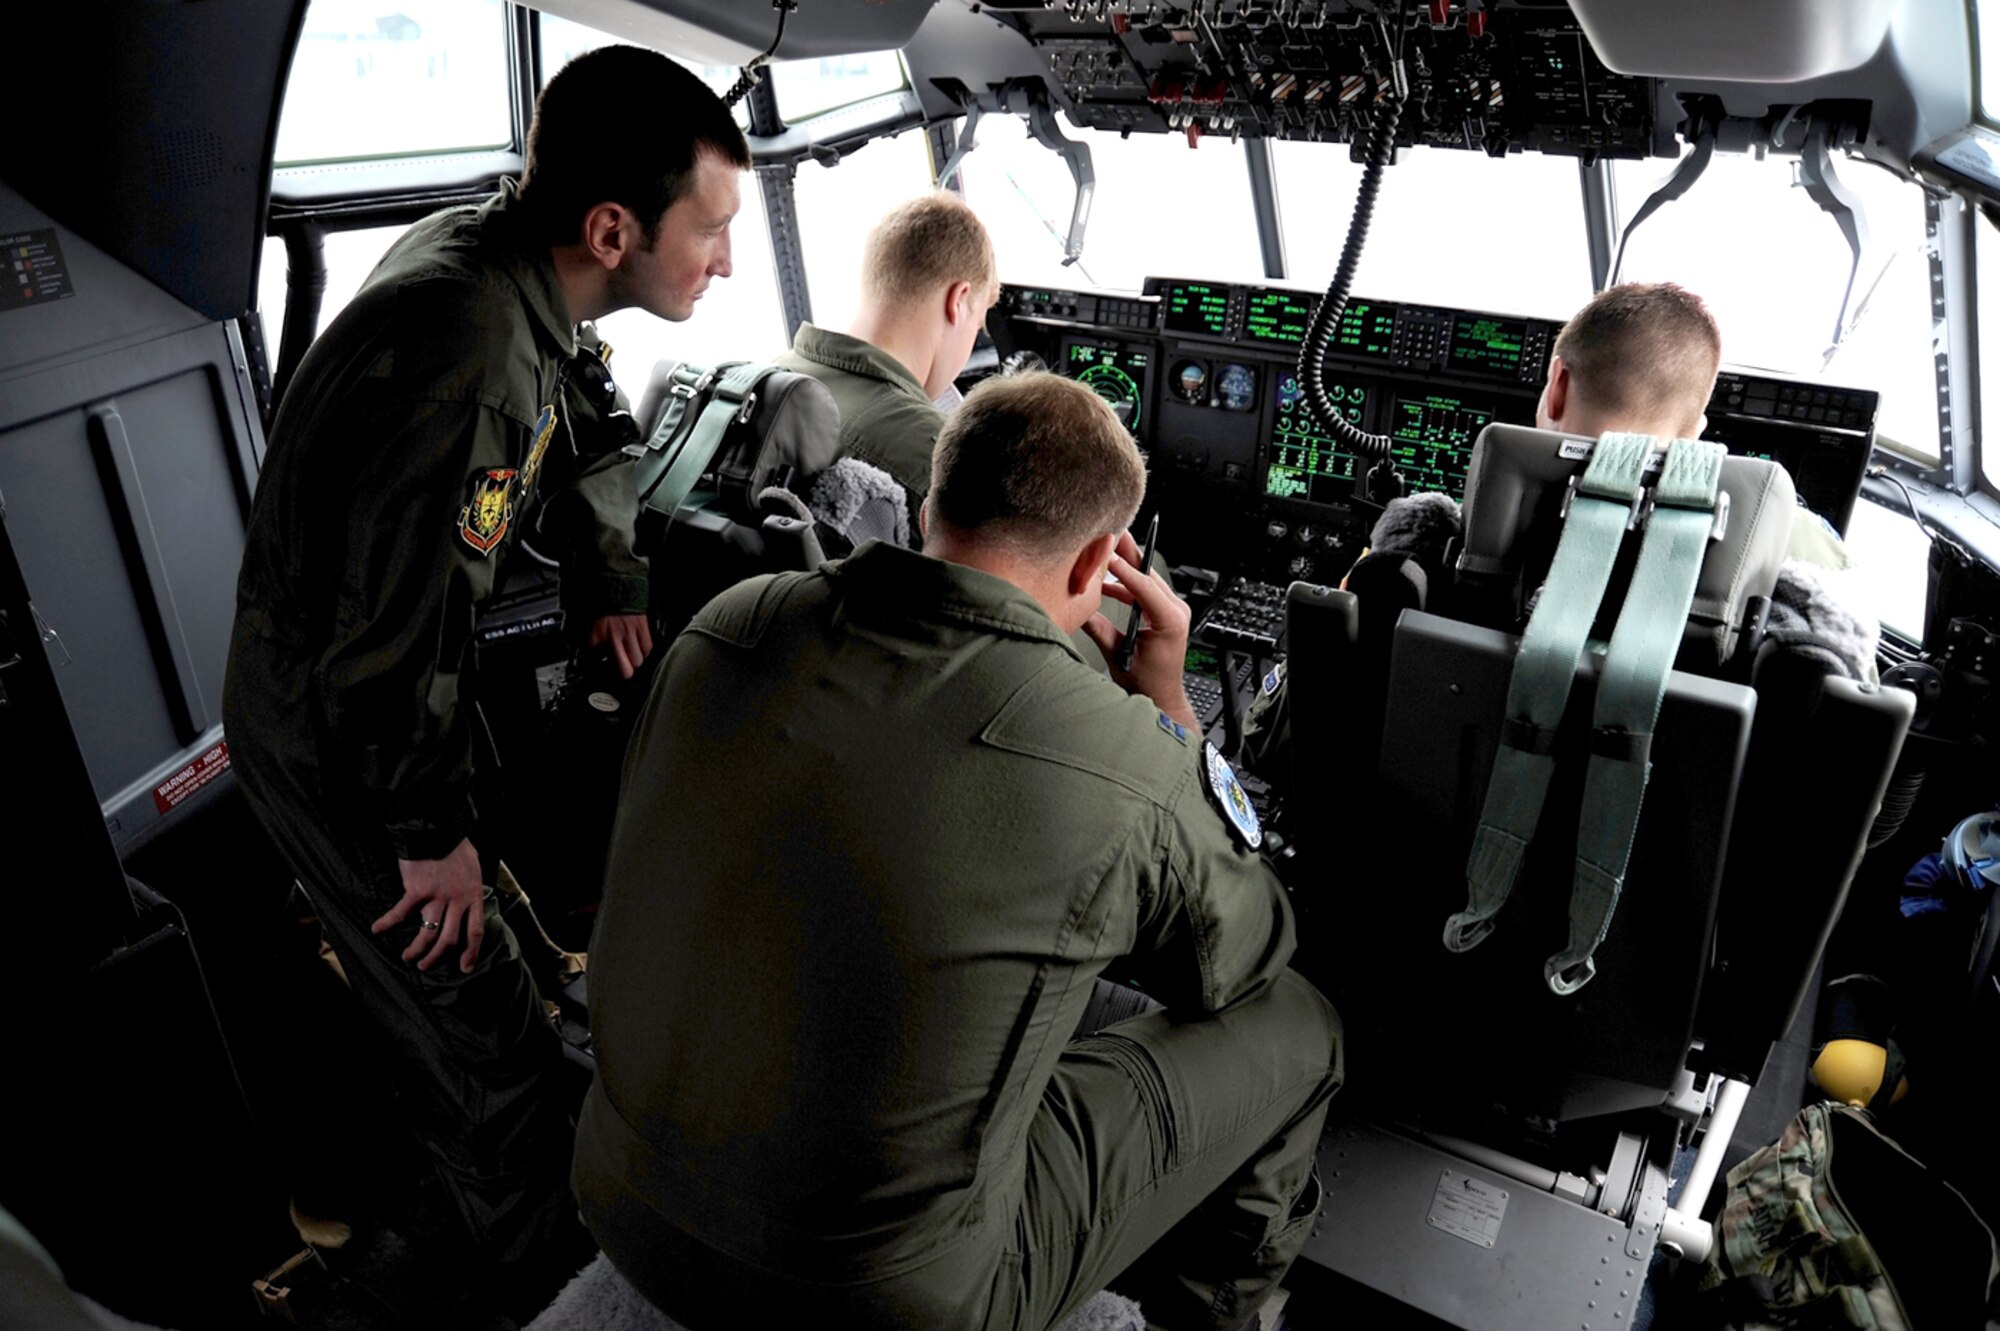 Bulgarian Air Force Lt. Hristo Valev looks over the shoulders of Capt. Jeff Davis, 1st Lt. Scott Lichtwardt and Capt. Adam Wantuck as they complete startup checks on a C-130 Hercules during Exercise Thracian Spring 2010 April 24, 2010, at Plovdiv Airport in Bulgaria. Lieutenant Valev is an Mi-24 pilot with the Bulgarian 24th air force and Captains Davis and Wantuck and Lieutenant Lichtwardt are all from the 37th Airlift Squadron. (U.S. Air Force photo/Master Sgt. Quinton T. Burris)